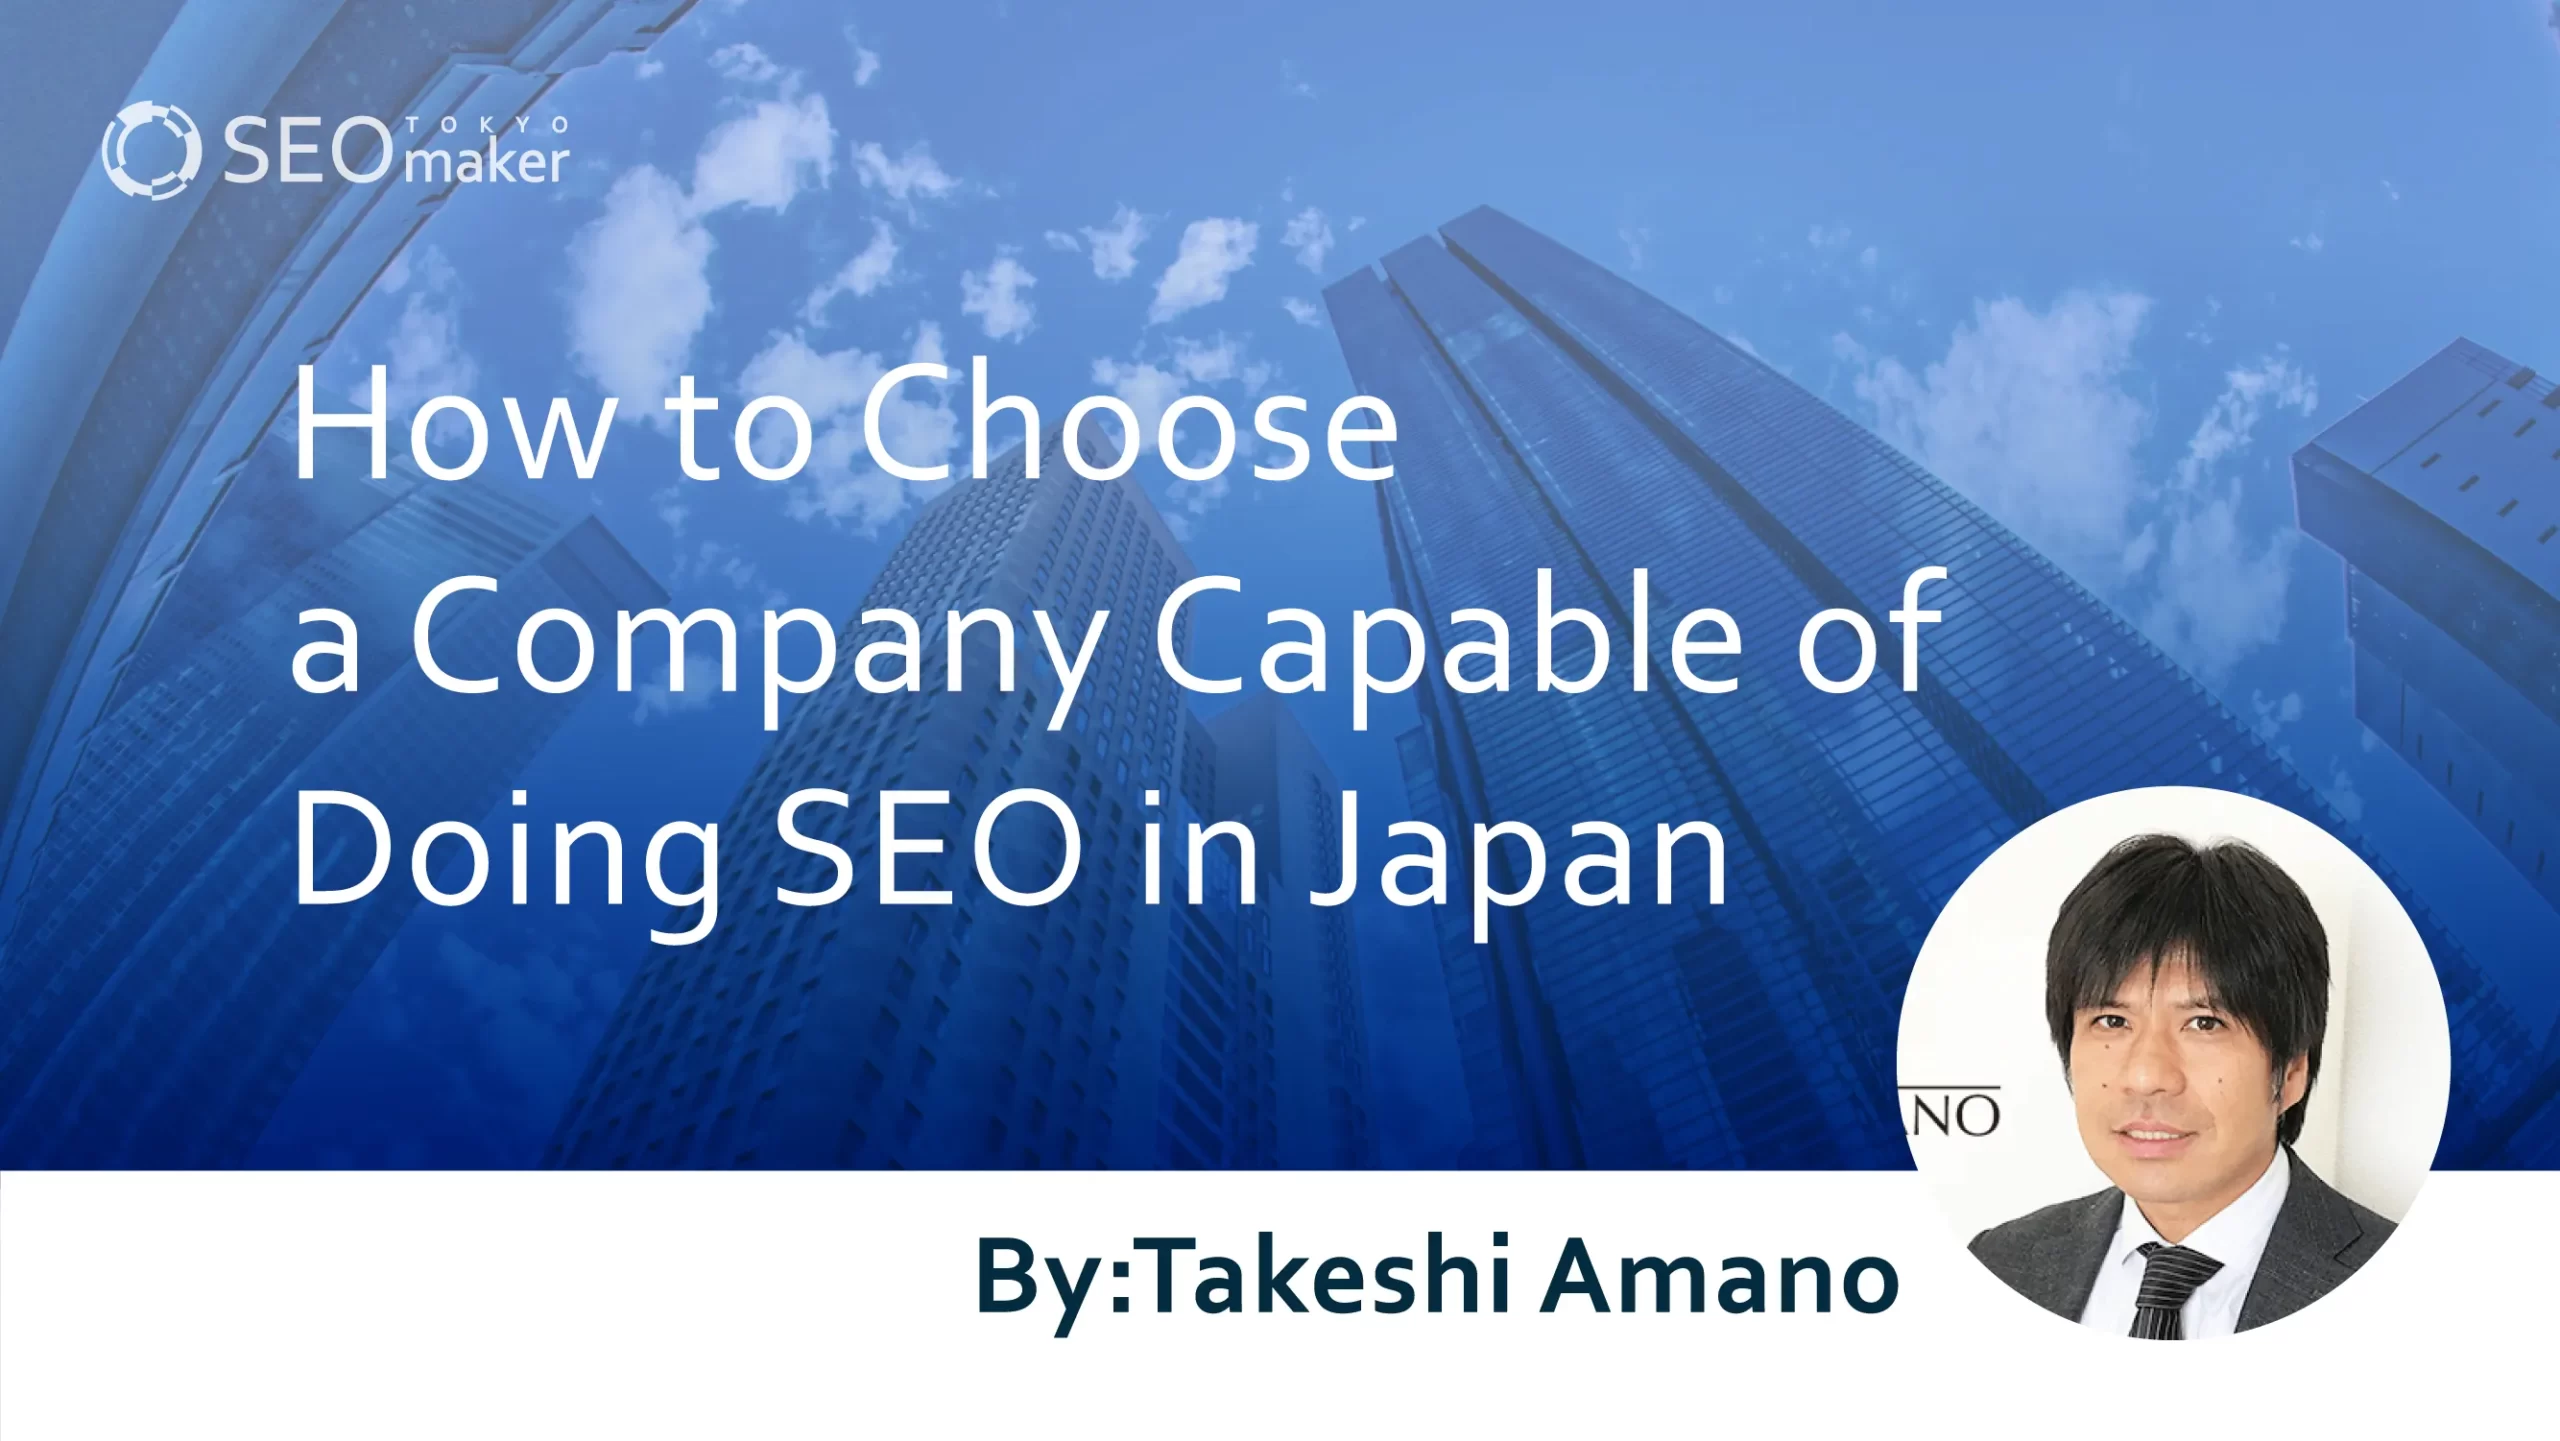 How to Choose a Company Capable of Doing SEO in Japan